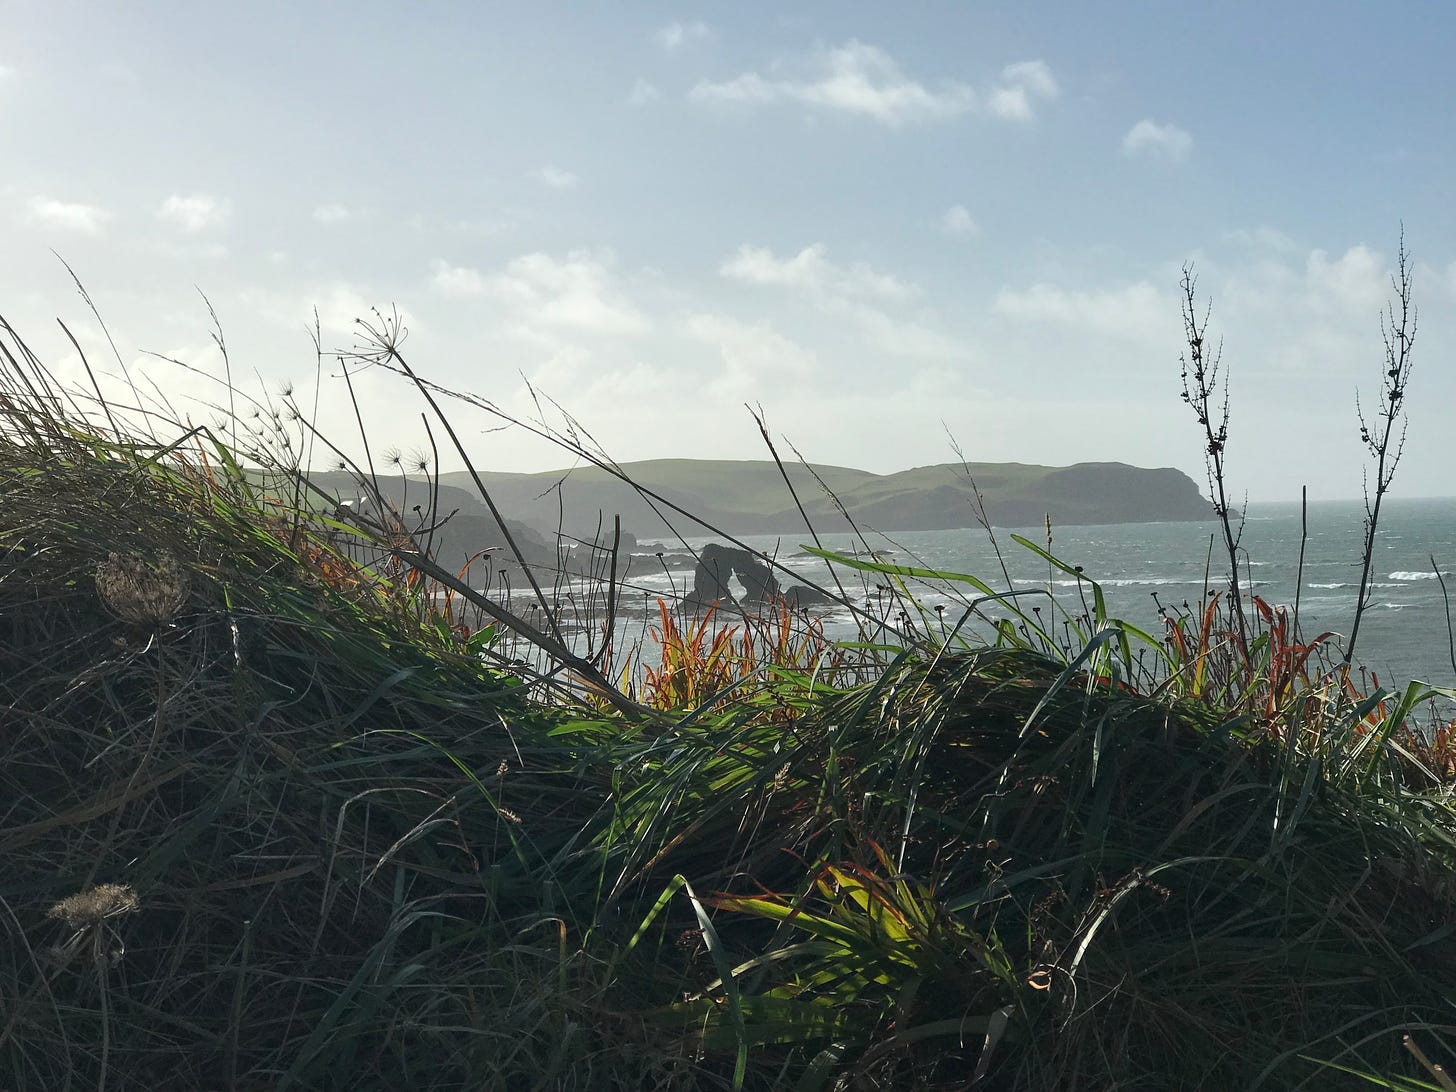 A photo from the coastal path: an arched rock off the coast, with calm sea behind, in the foreground, sea grass and flowers